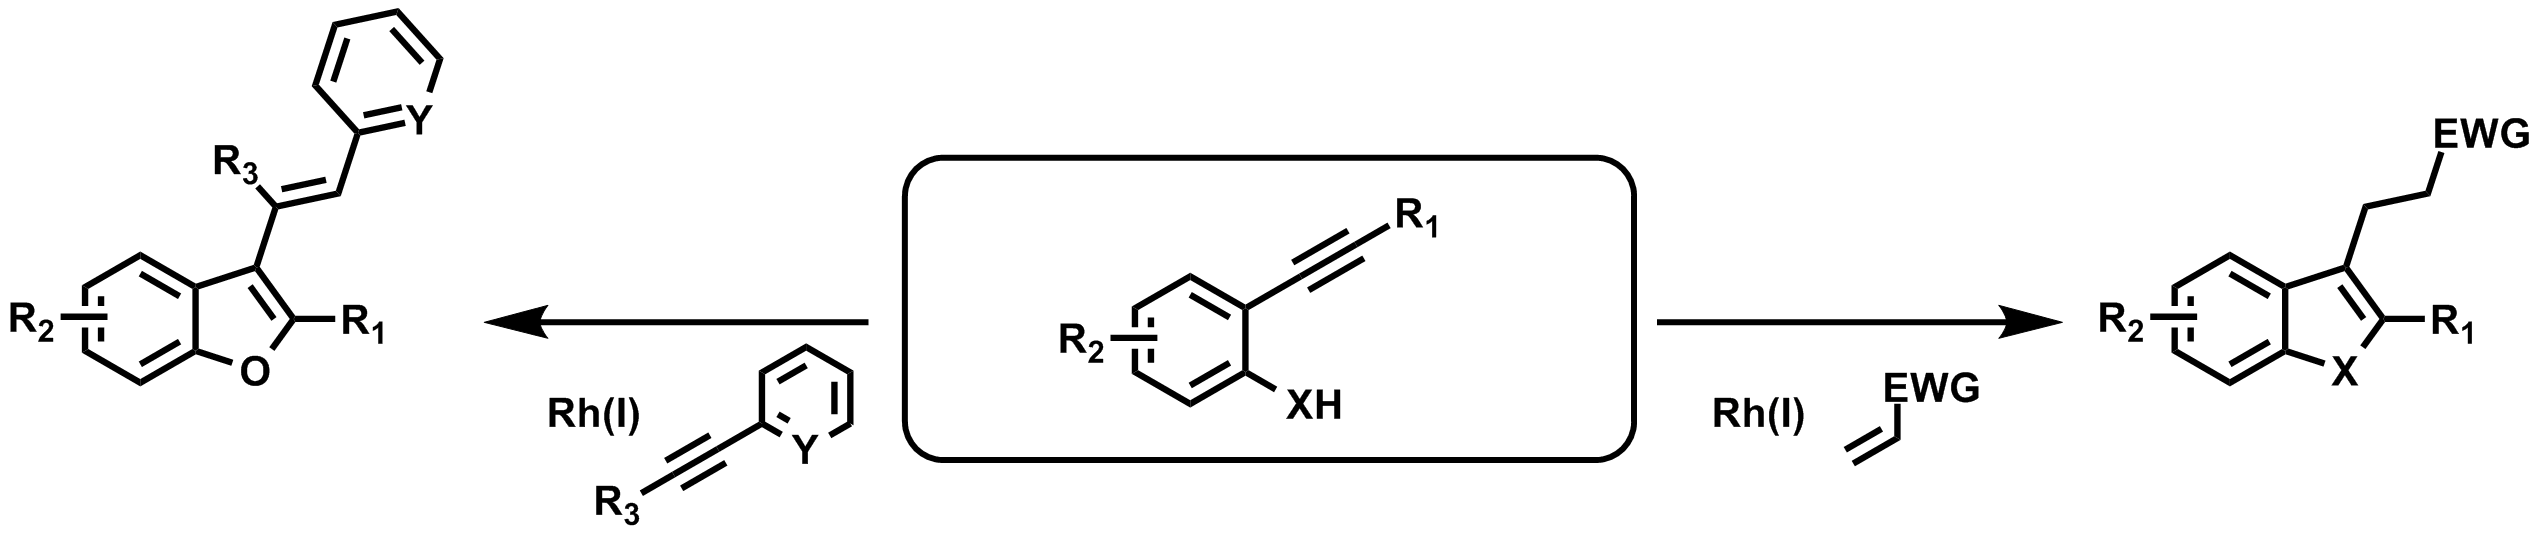 Abstract image for Domino Rhodium(I)-Catalysed Reactions for the Efficient Synthesis of Substituted Benzofurans and Indoles